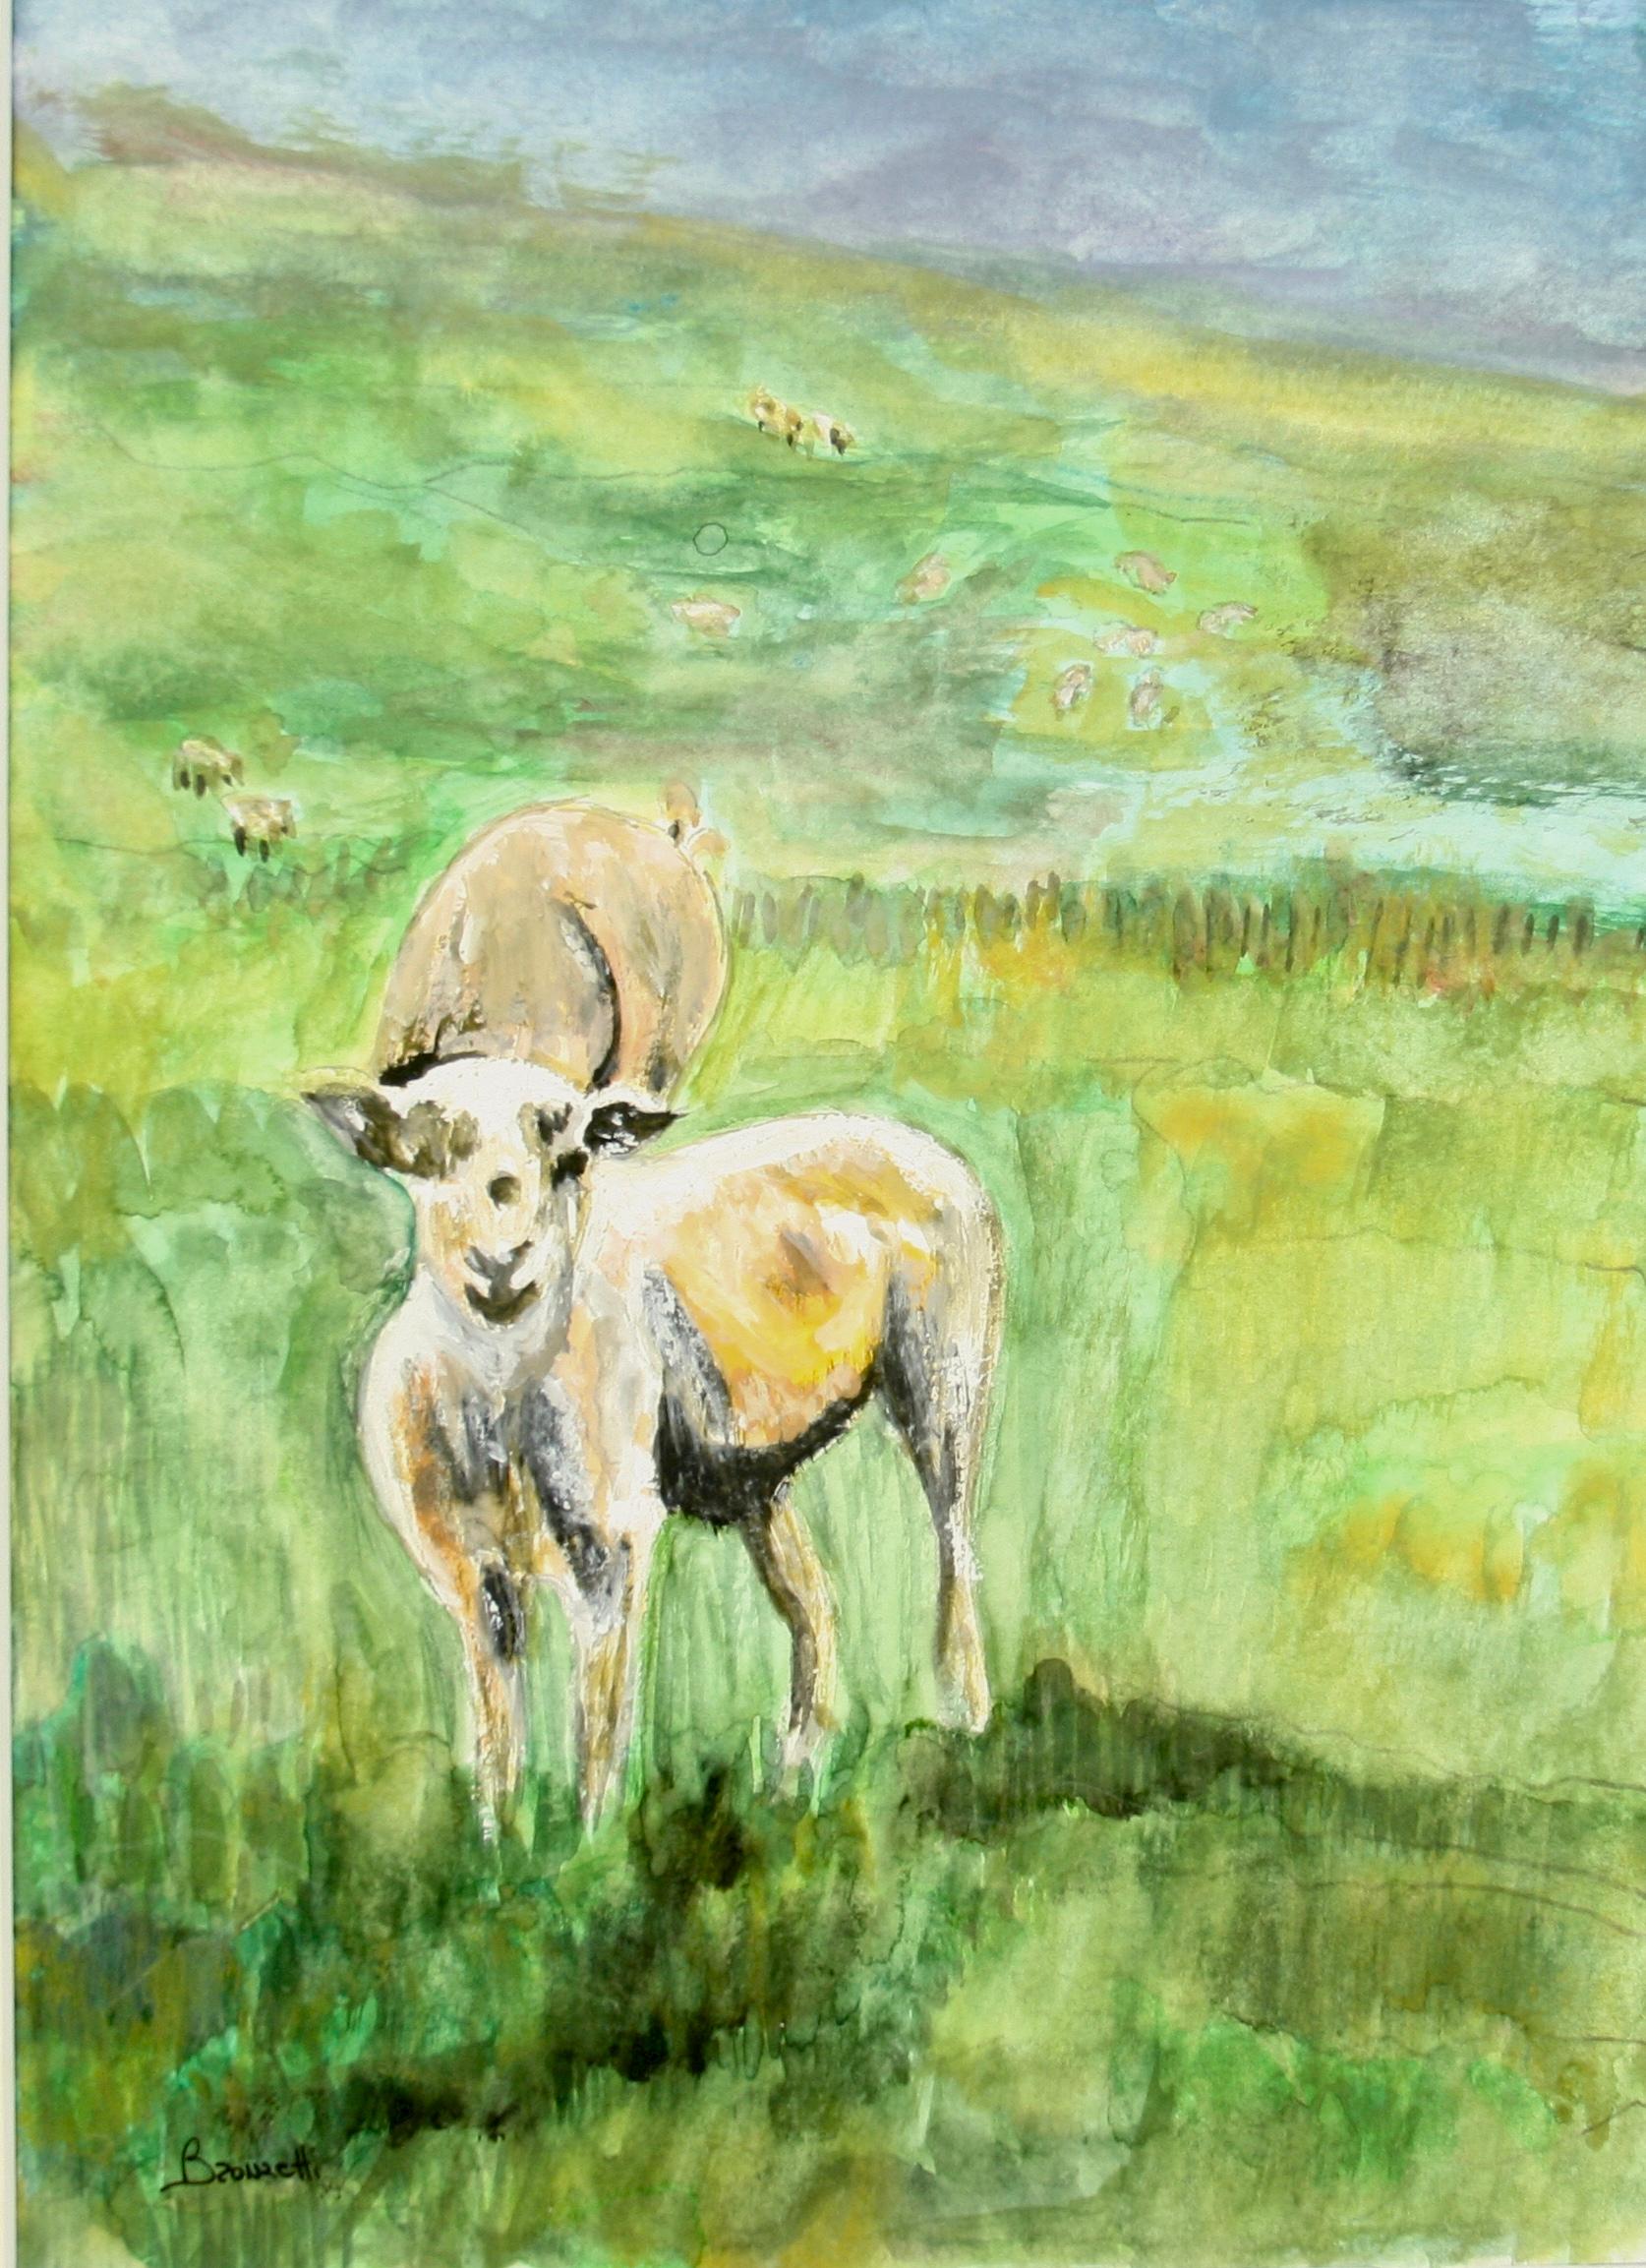 #5-3449 Seep Grazing landscape, acrylic on paper of sheep grazing in a field, signed by Brunetti
Set in a 16x20